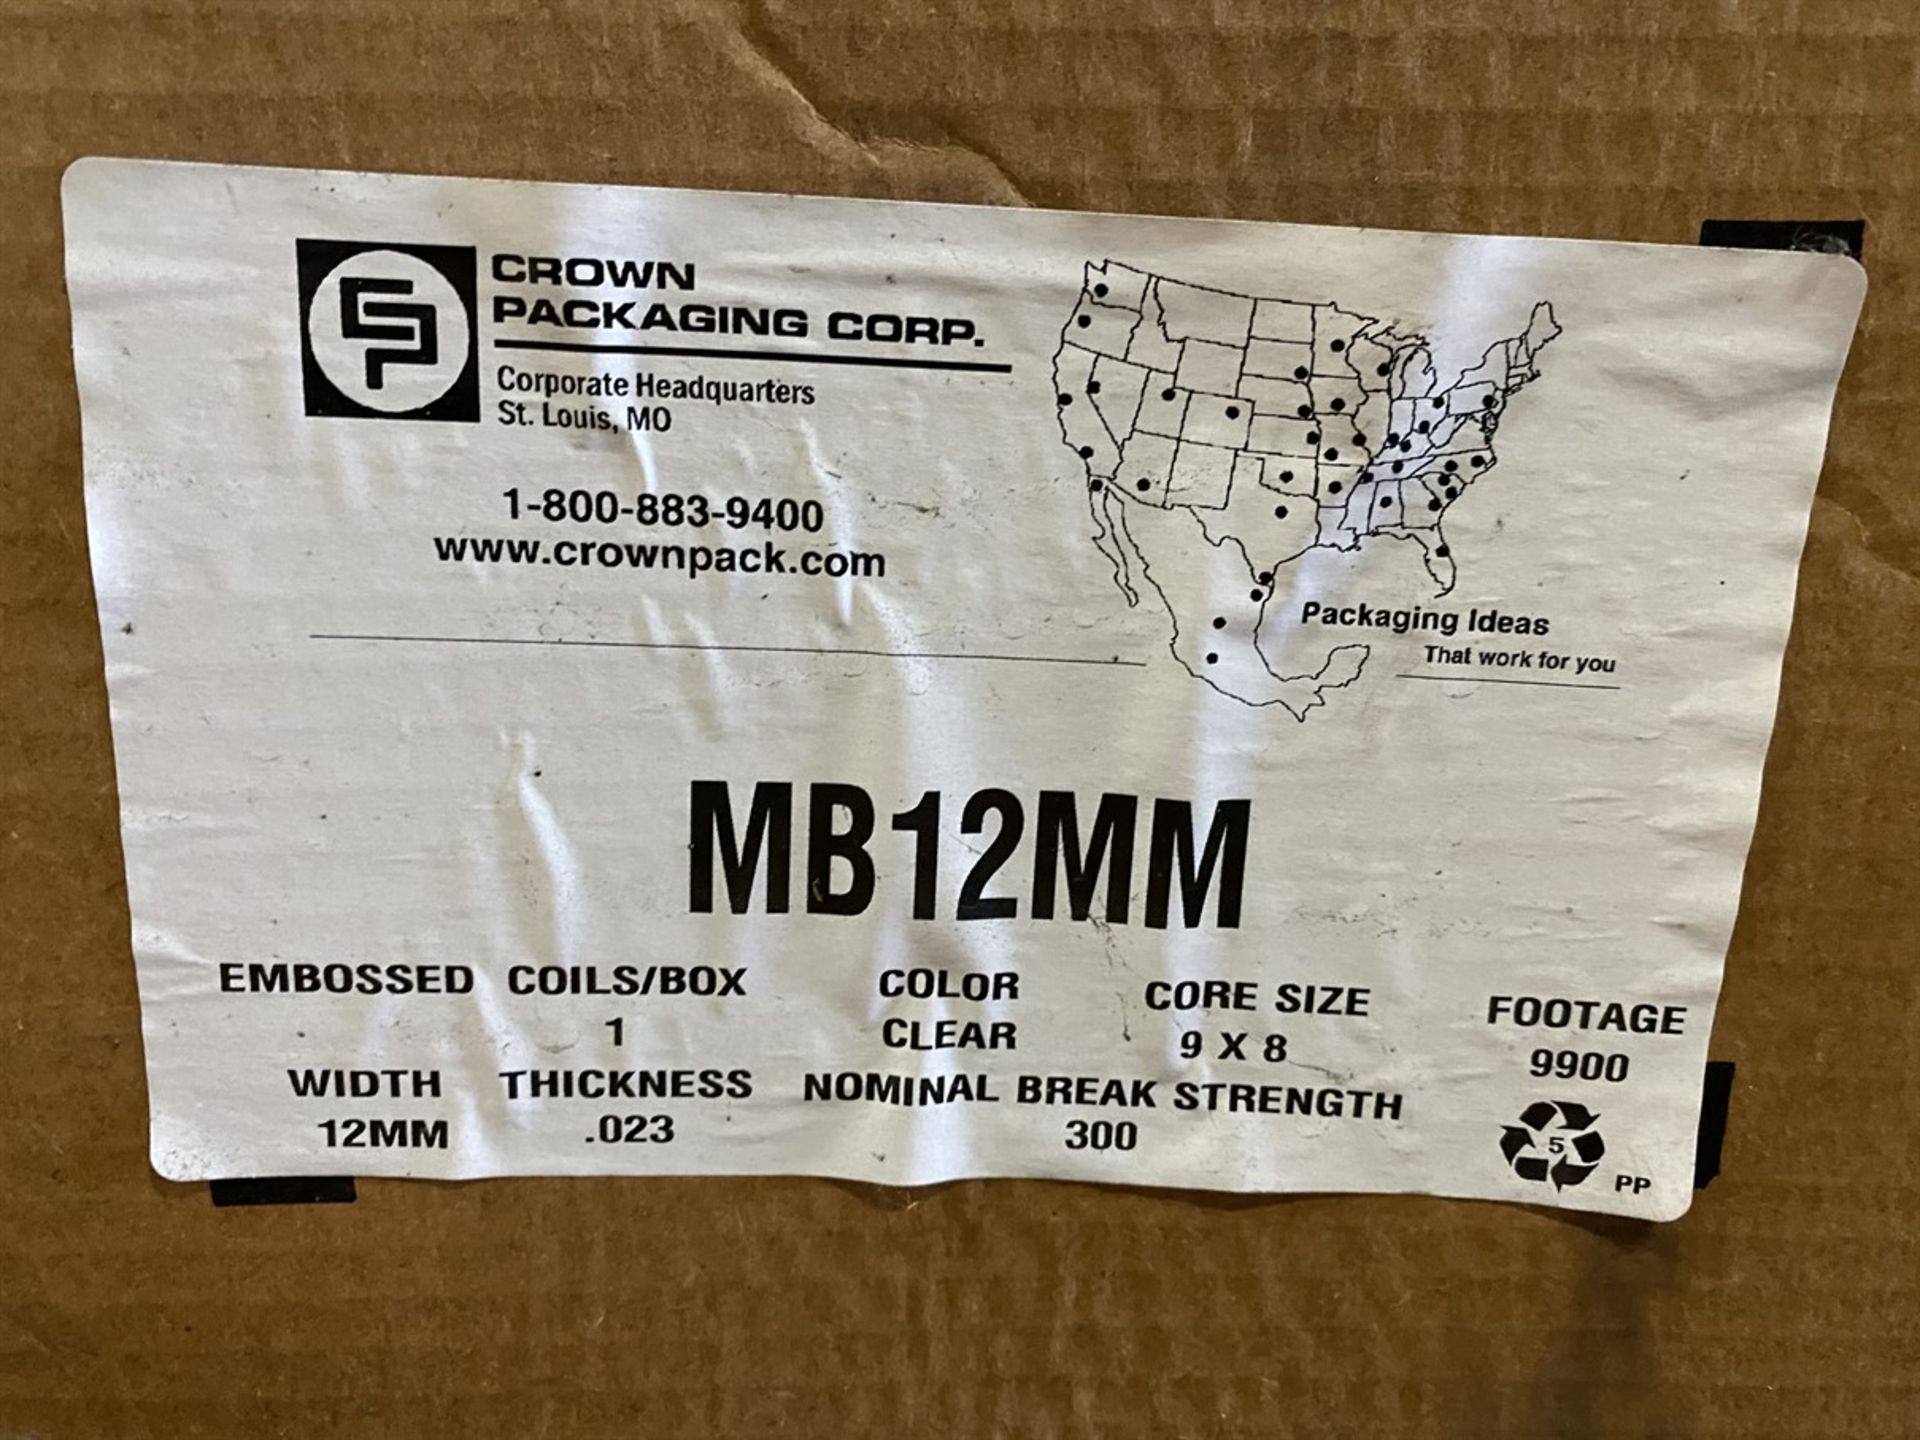 Lot of (5) Boxes of New Crown Packaging Corp MB12MM Banding Rolls - Image 2 of 2